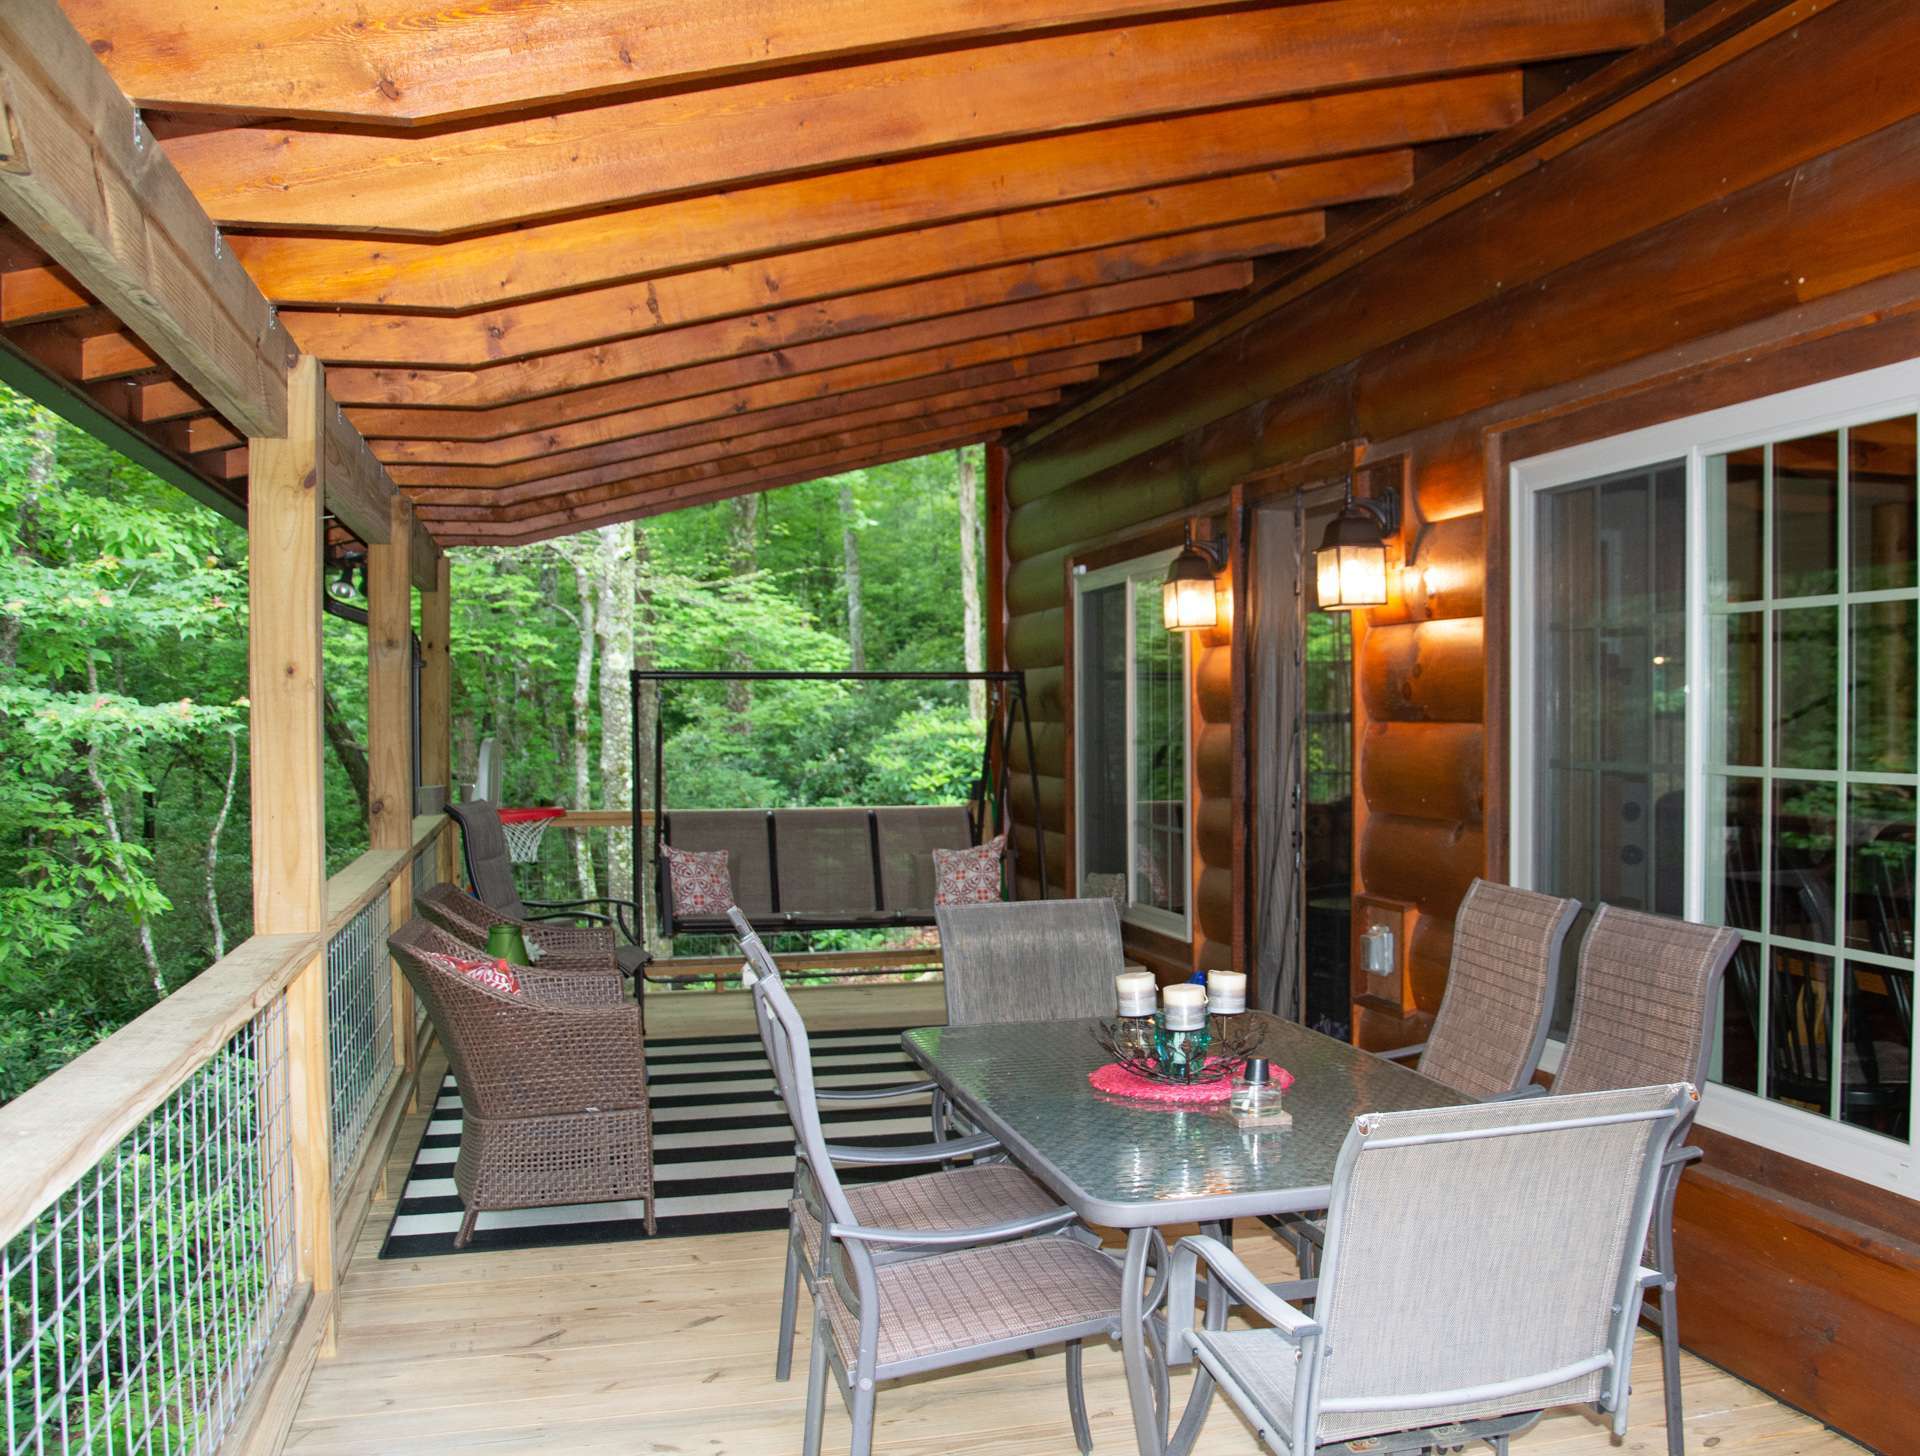 The back deck is partially covered and partially open allowing you to enjoy the great outdoors come rain or shine!